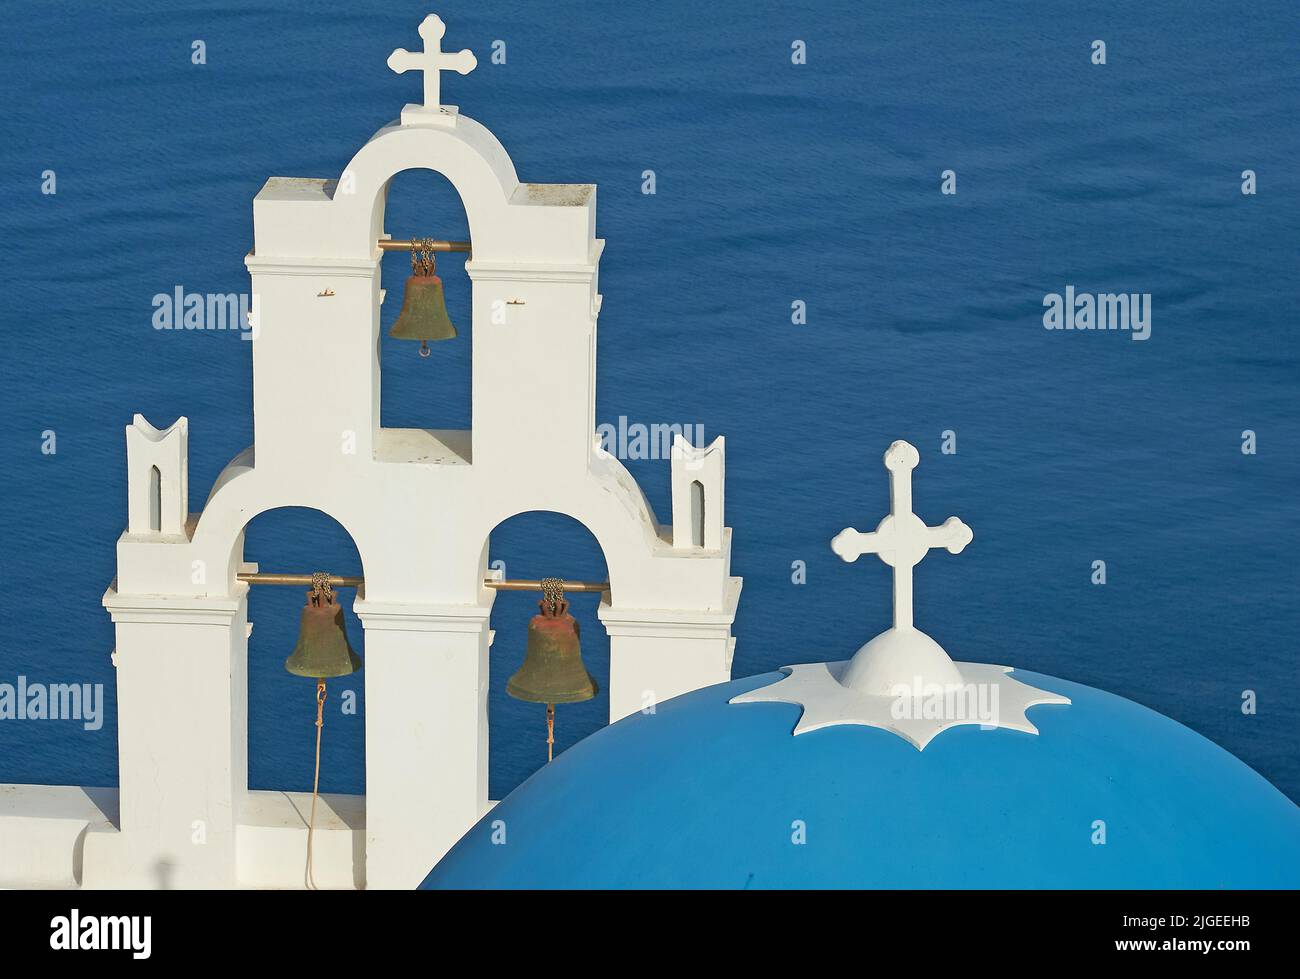 Santorini, Greece and the blue dome and bell tower of the Greek Orthodox church commonly known as the Three Bells of Thira (Fira) Stock Photo